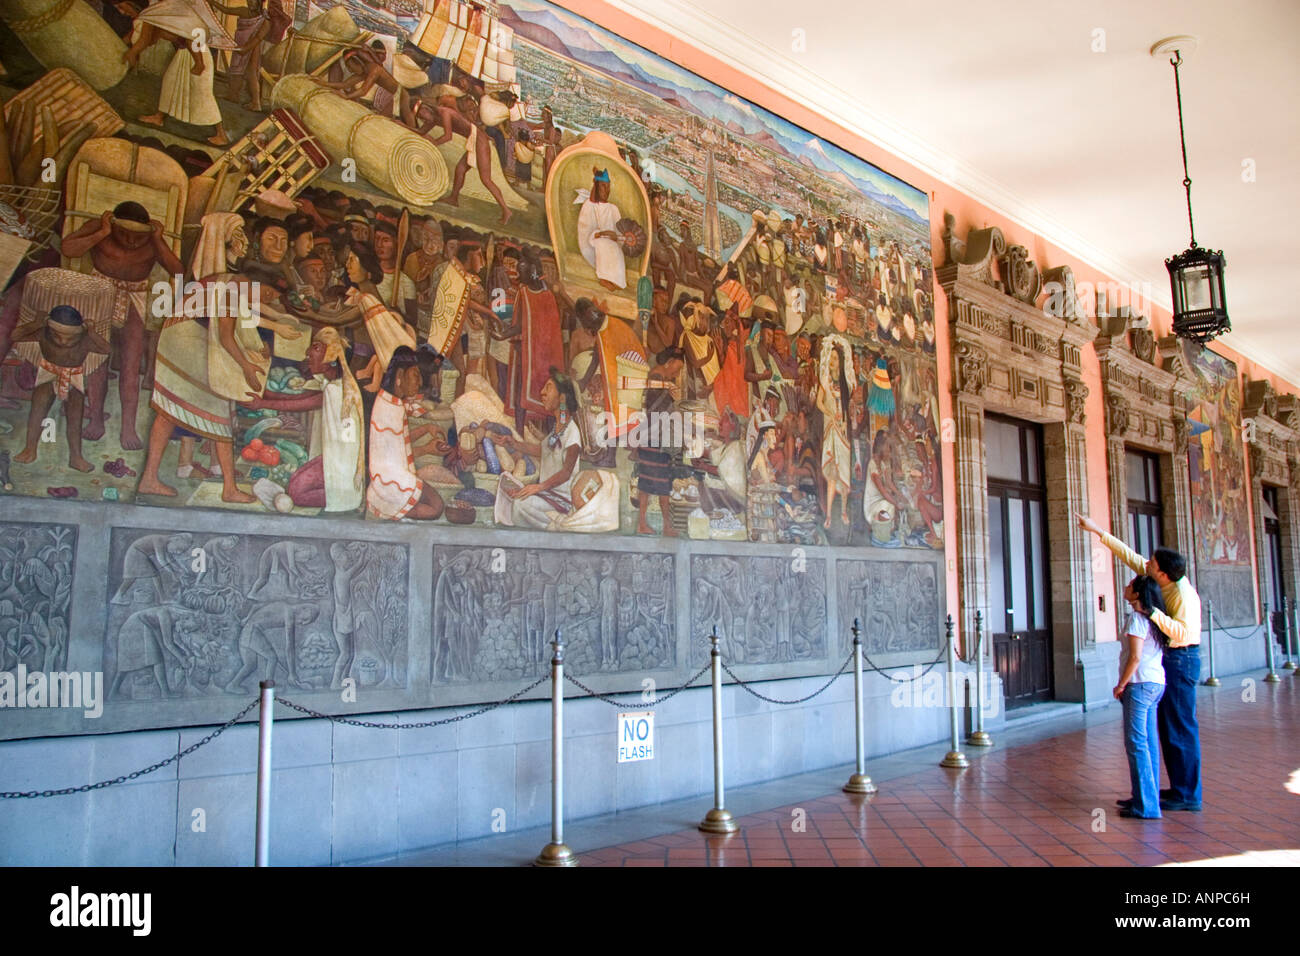 People look at a mural painted by Diego Rivera at the National Palace in Mexico City Mexico Stock Photo